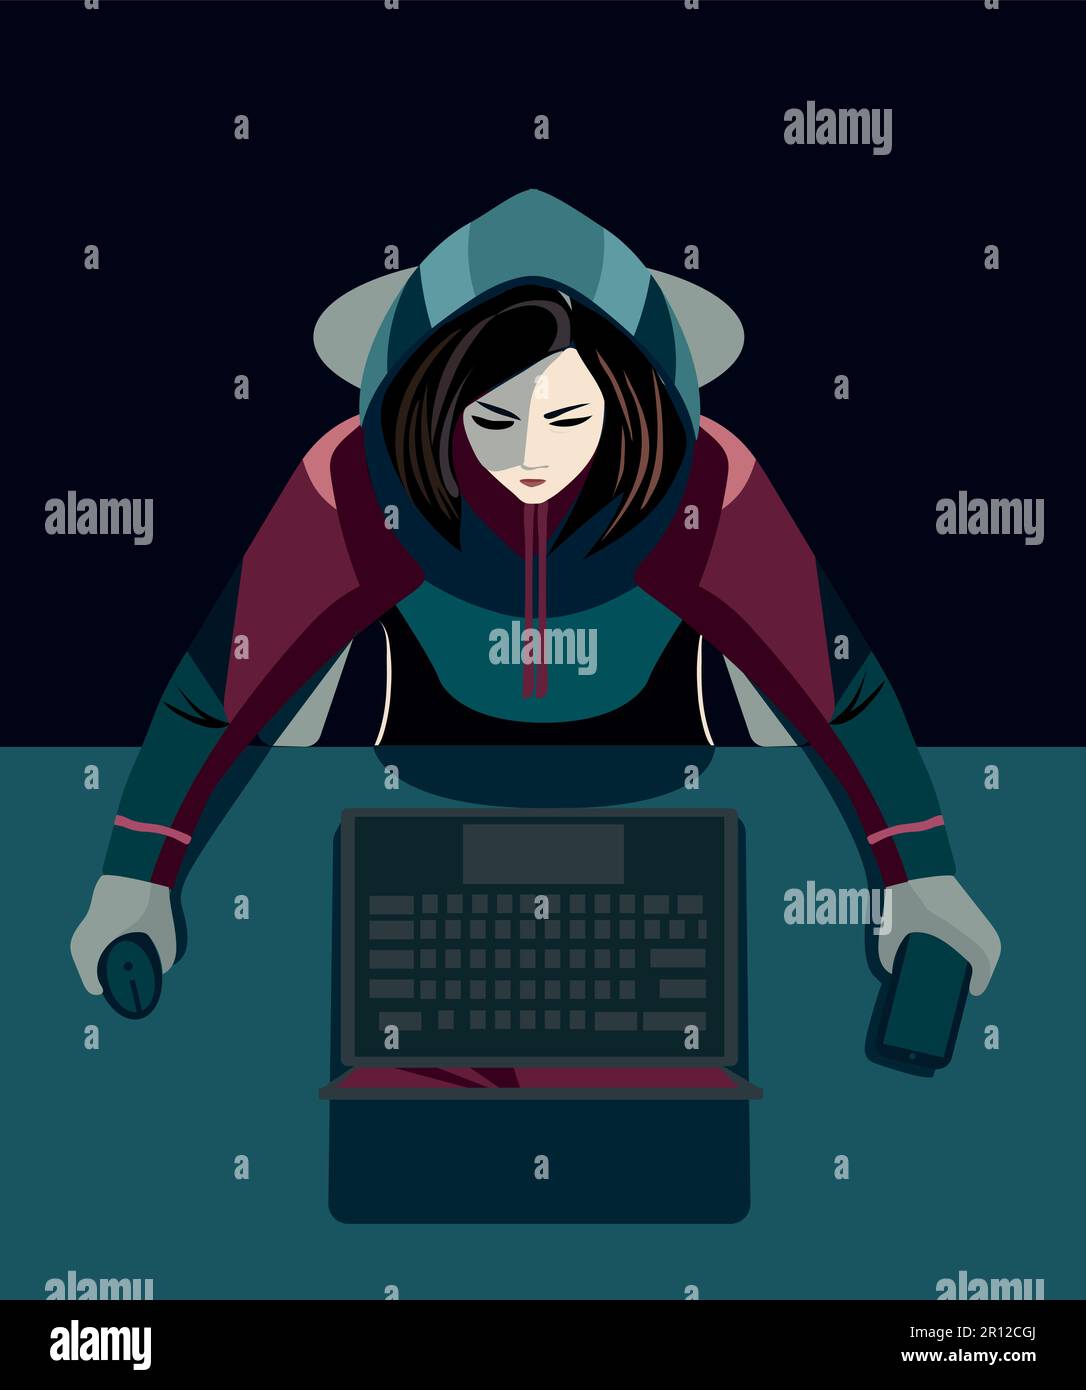 Top view. Hacker with computer on a desktop. Hooded girl with laptop. Hacking connection. Steal information and spread it online Stock Vector